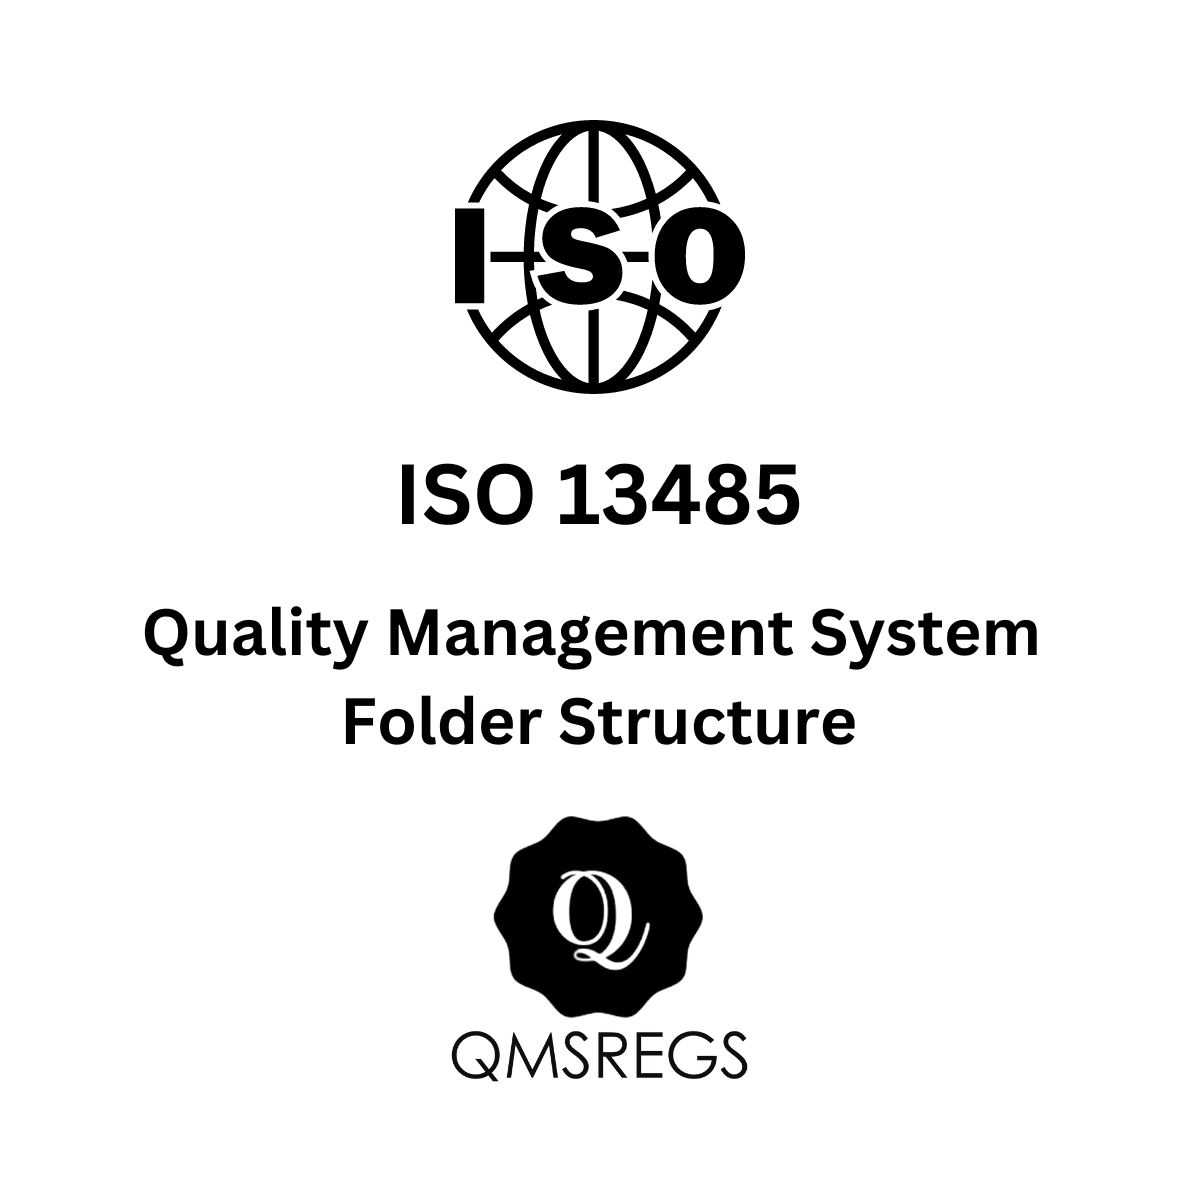 ISO 13485 Quality Management System (QMS) Folder Structure